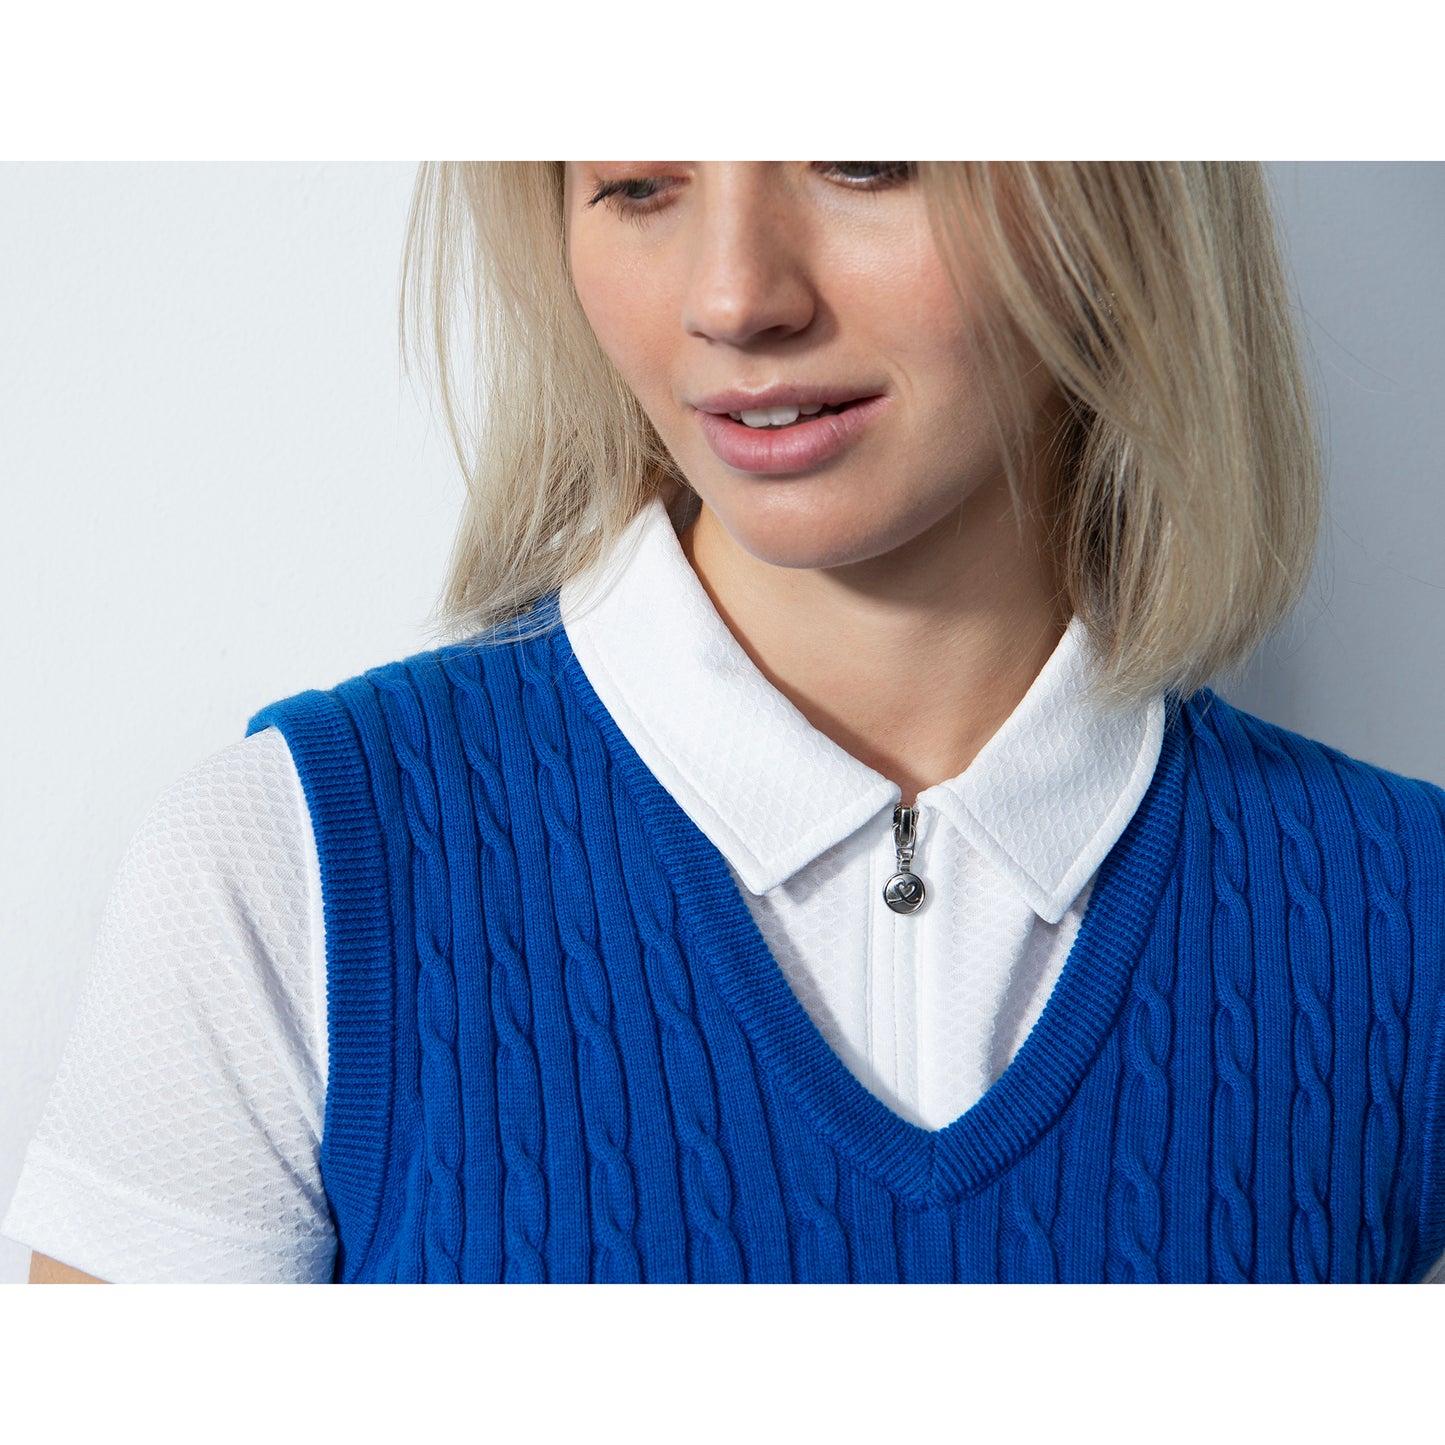 Daily Sports Ladies Cable Knit Sleeveless Sweater in Cosmic Blue 